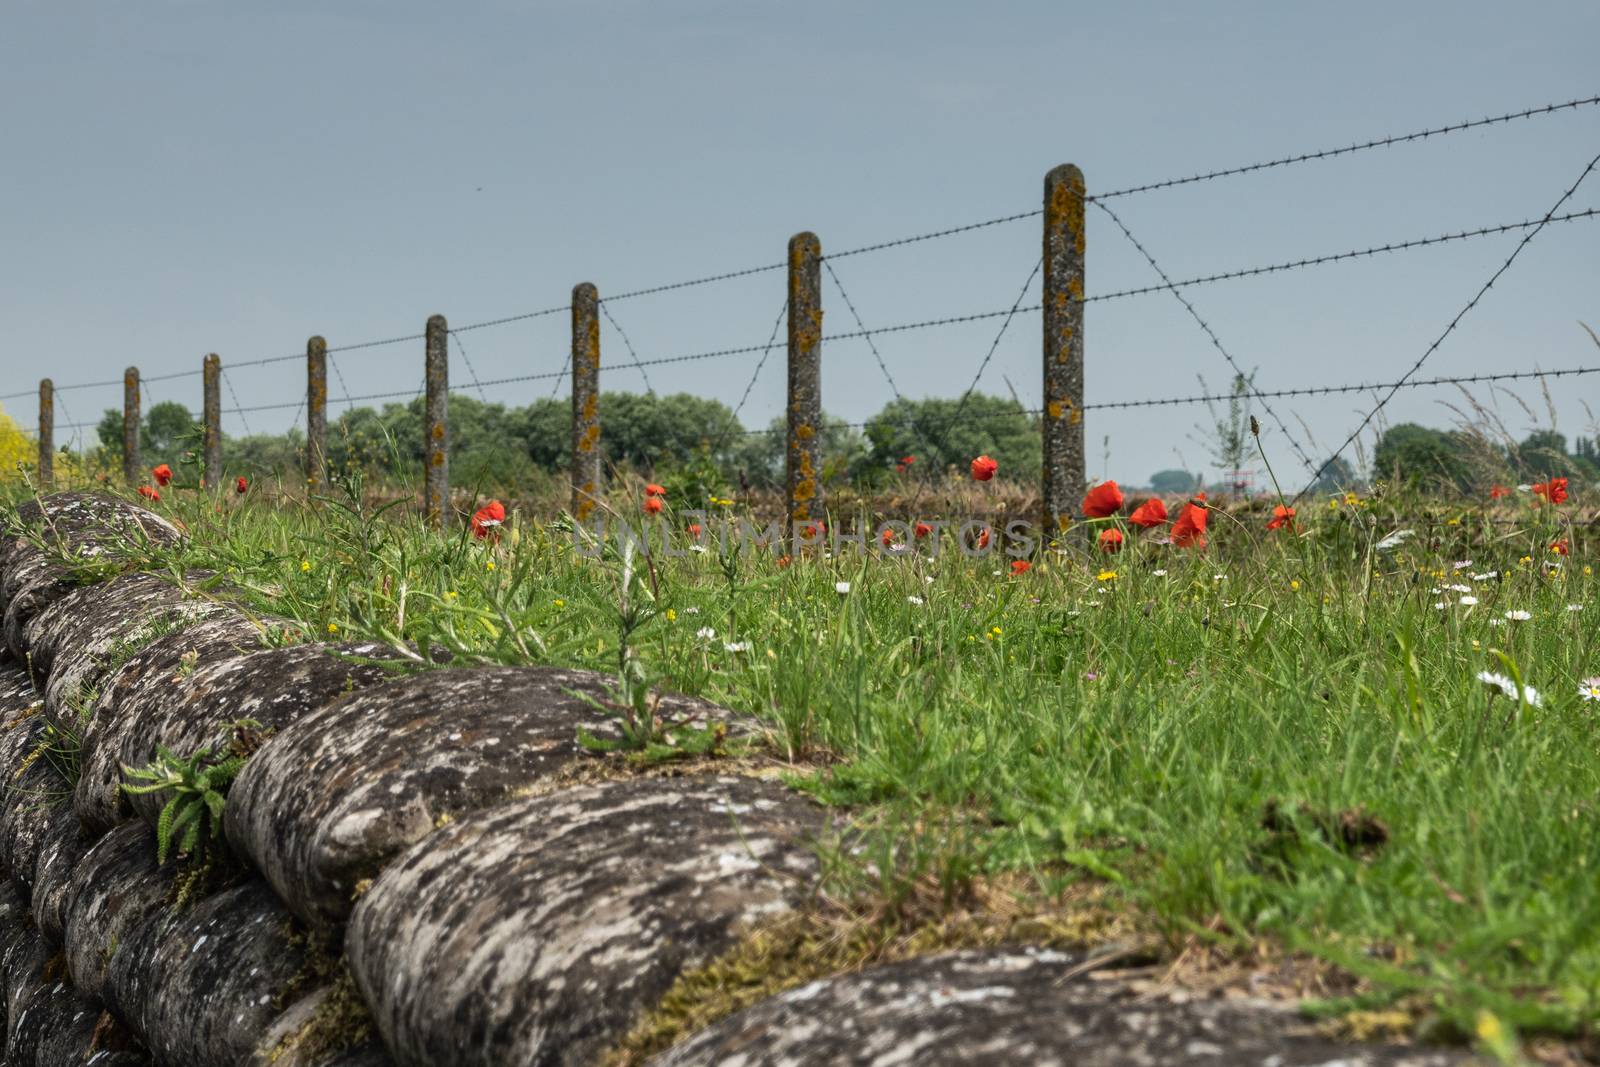 Diksmuide, Flanders, Belgium -  June 19, 2019: Historic WW1 Trenches, called Dodengang along IJzer River, shows gray-brown stone-hard sandbags, green grass, red poppies. Barbed wire fence.